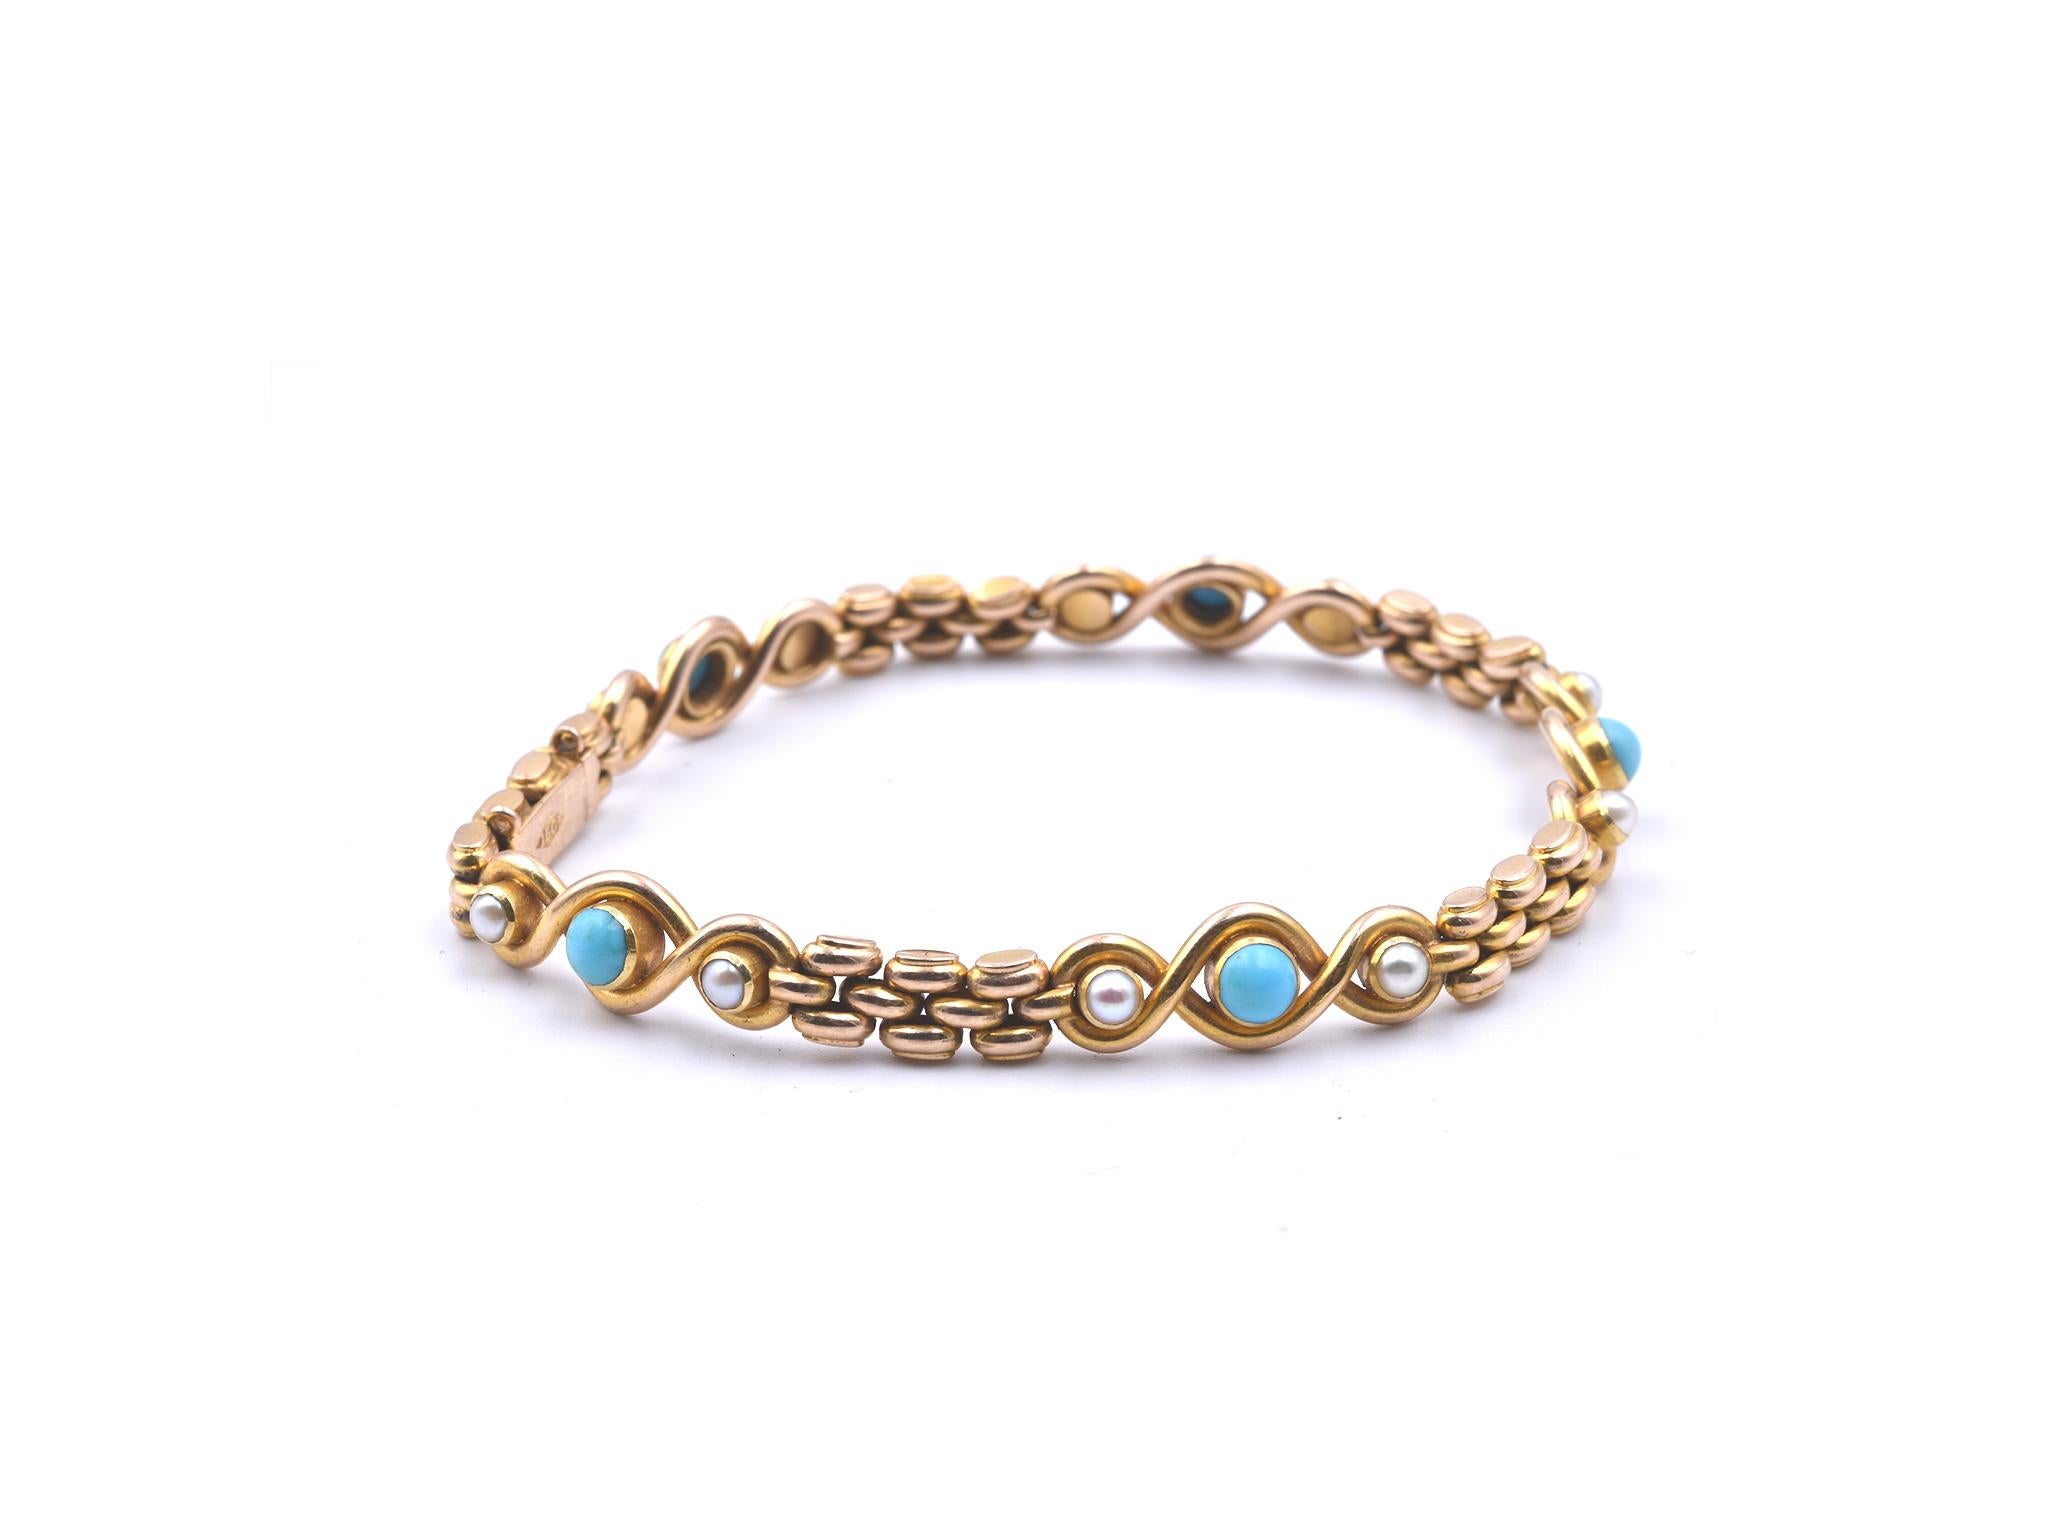 Designer: custom design
Material: 14 yellow gold
Dimensions: bracelet is 7-inch long and 7.82mm wide at the widest part of the bracelet
Weight: 17.85 grams
